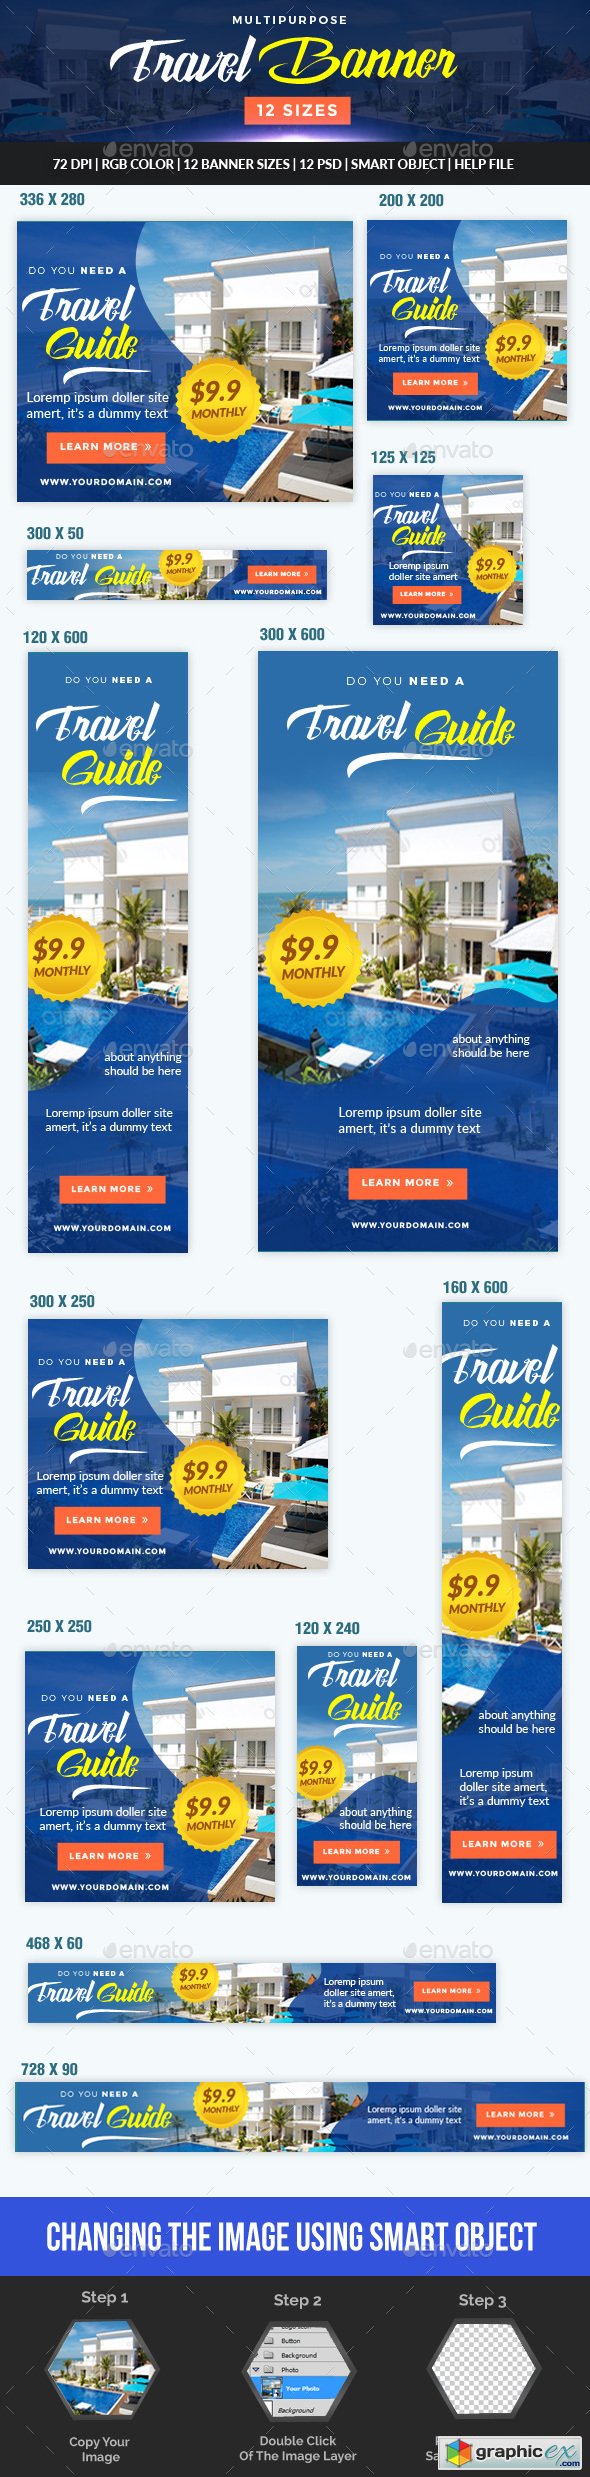 Multipurpose Travel and Hotel Banner